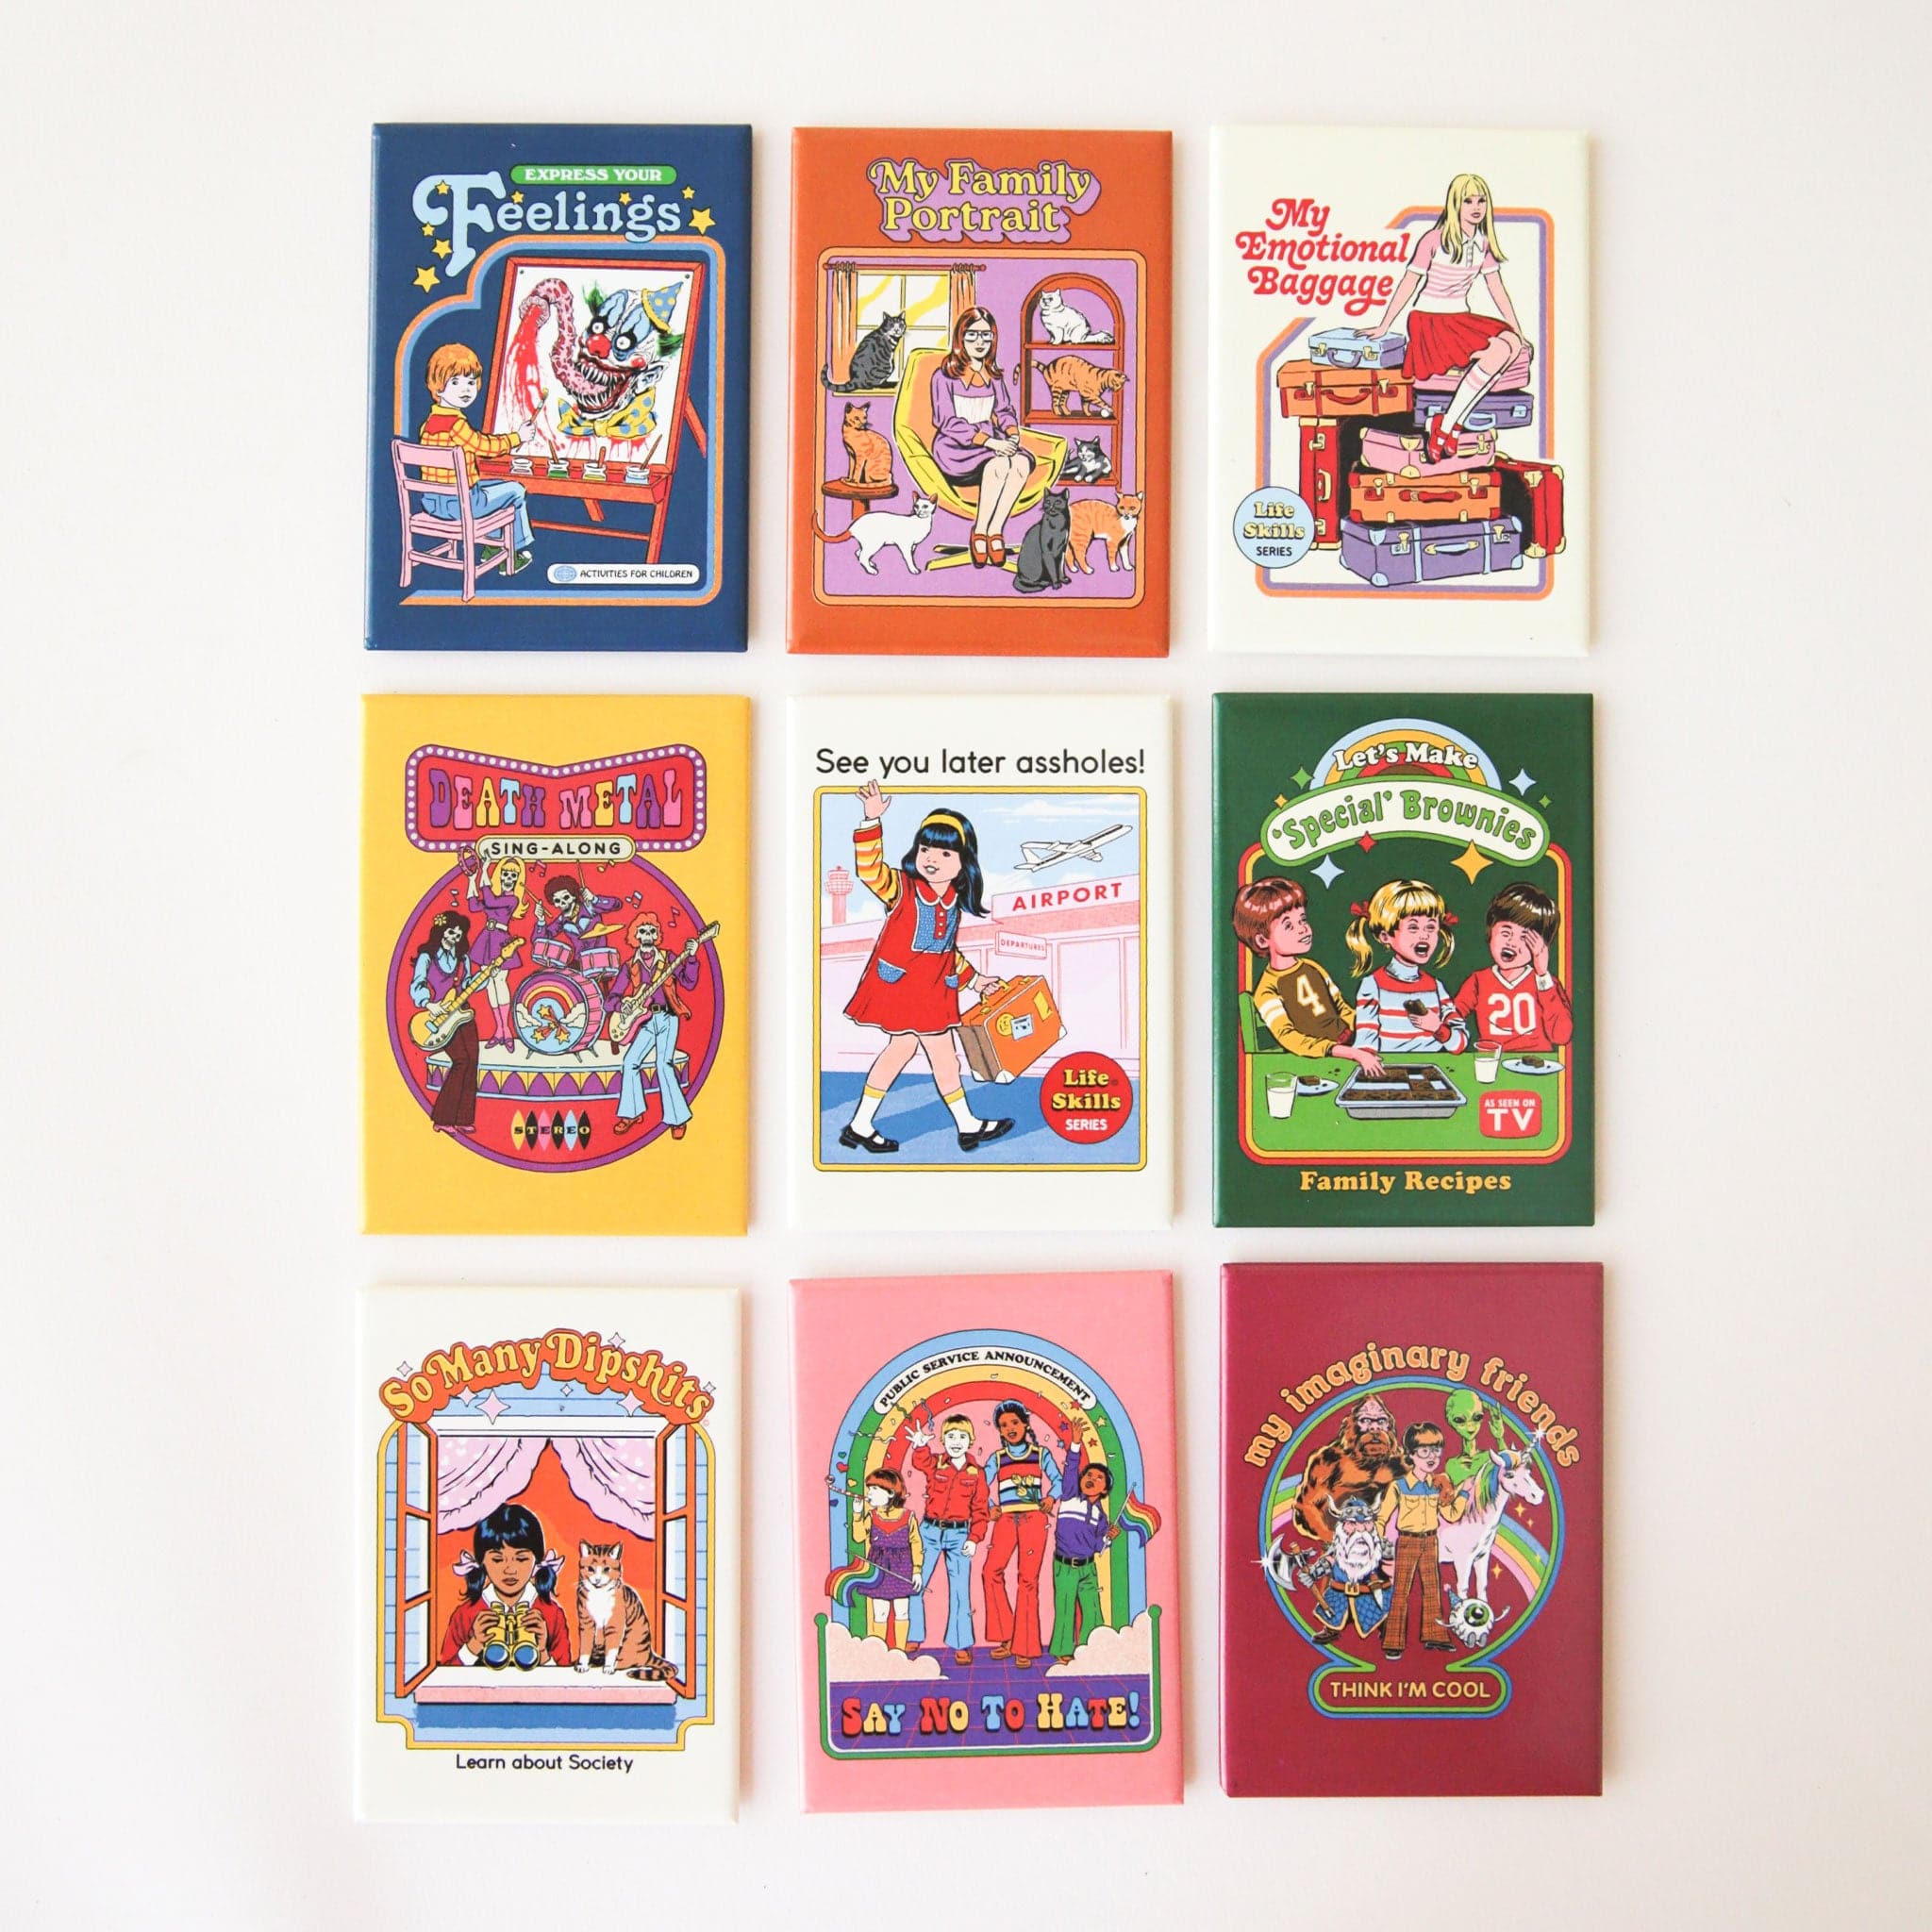 The magnet next to a variety of other magnets with cheeky sayings and vibrant color illustrations. 